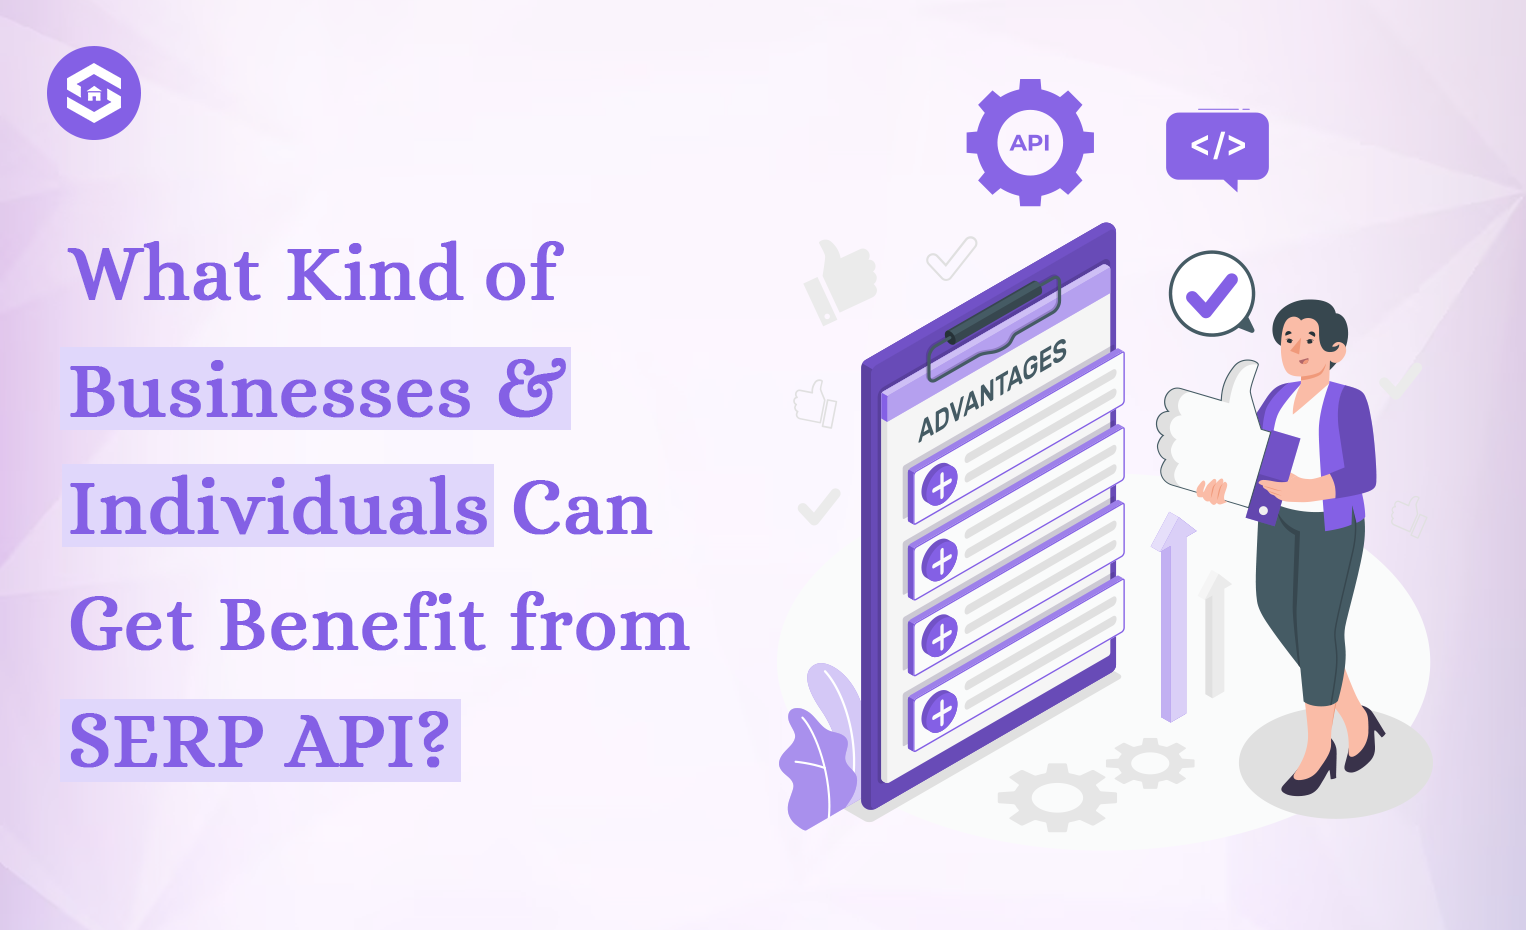 Who Can Get Benefit or Advantages from SERP API?